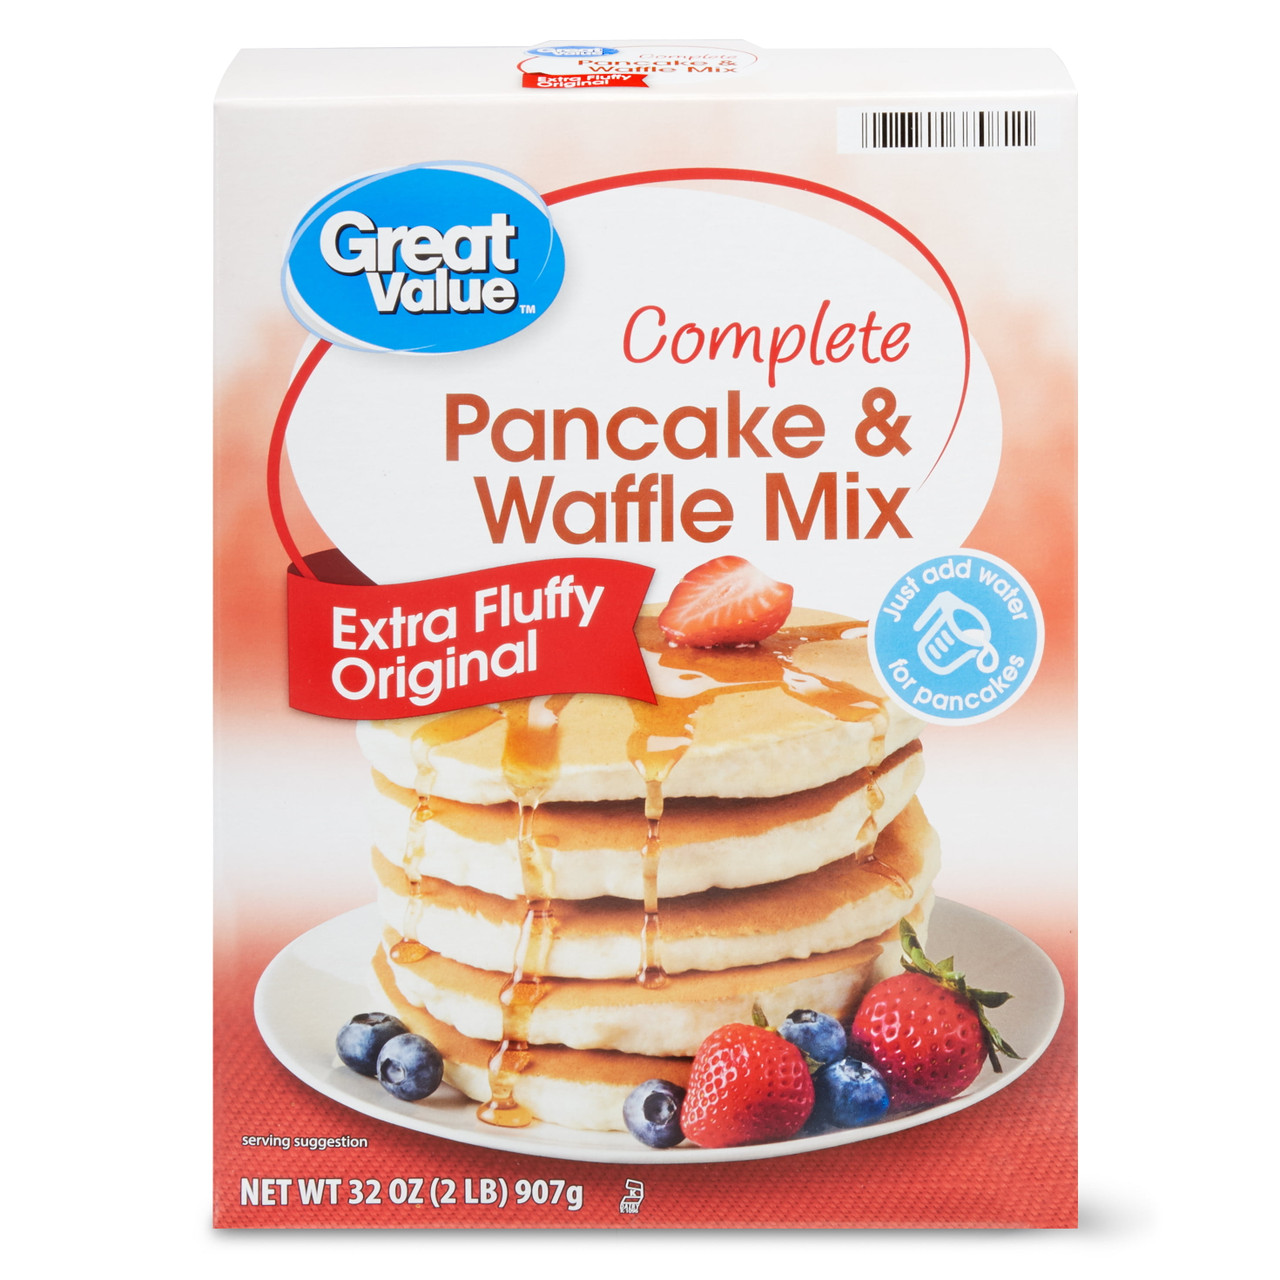 Great Value Complete Pancake & Waffle Mix, Extra Fluffy, Original, 32 oz - *Pre-Order